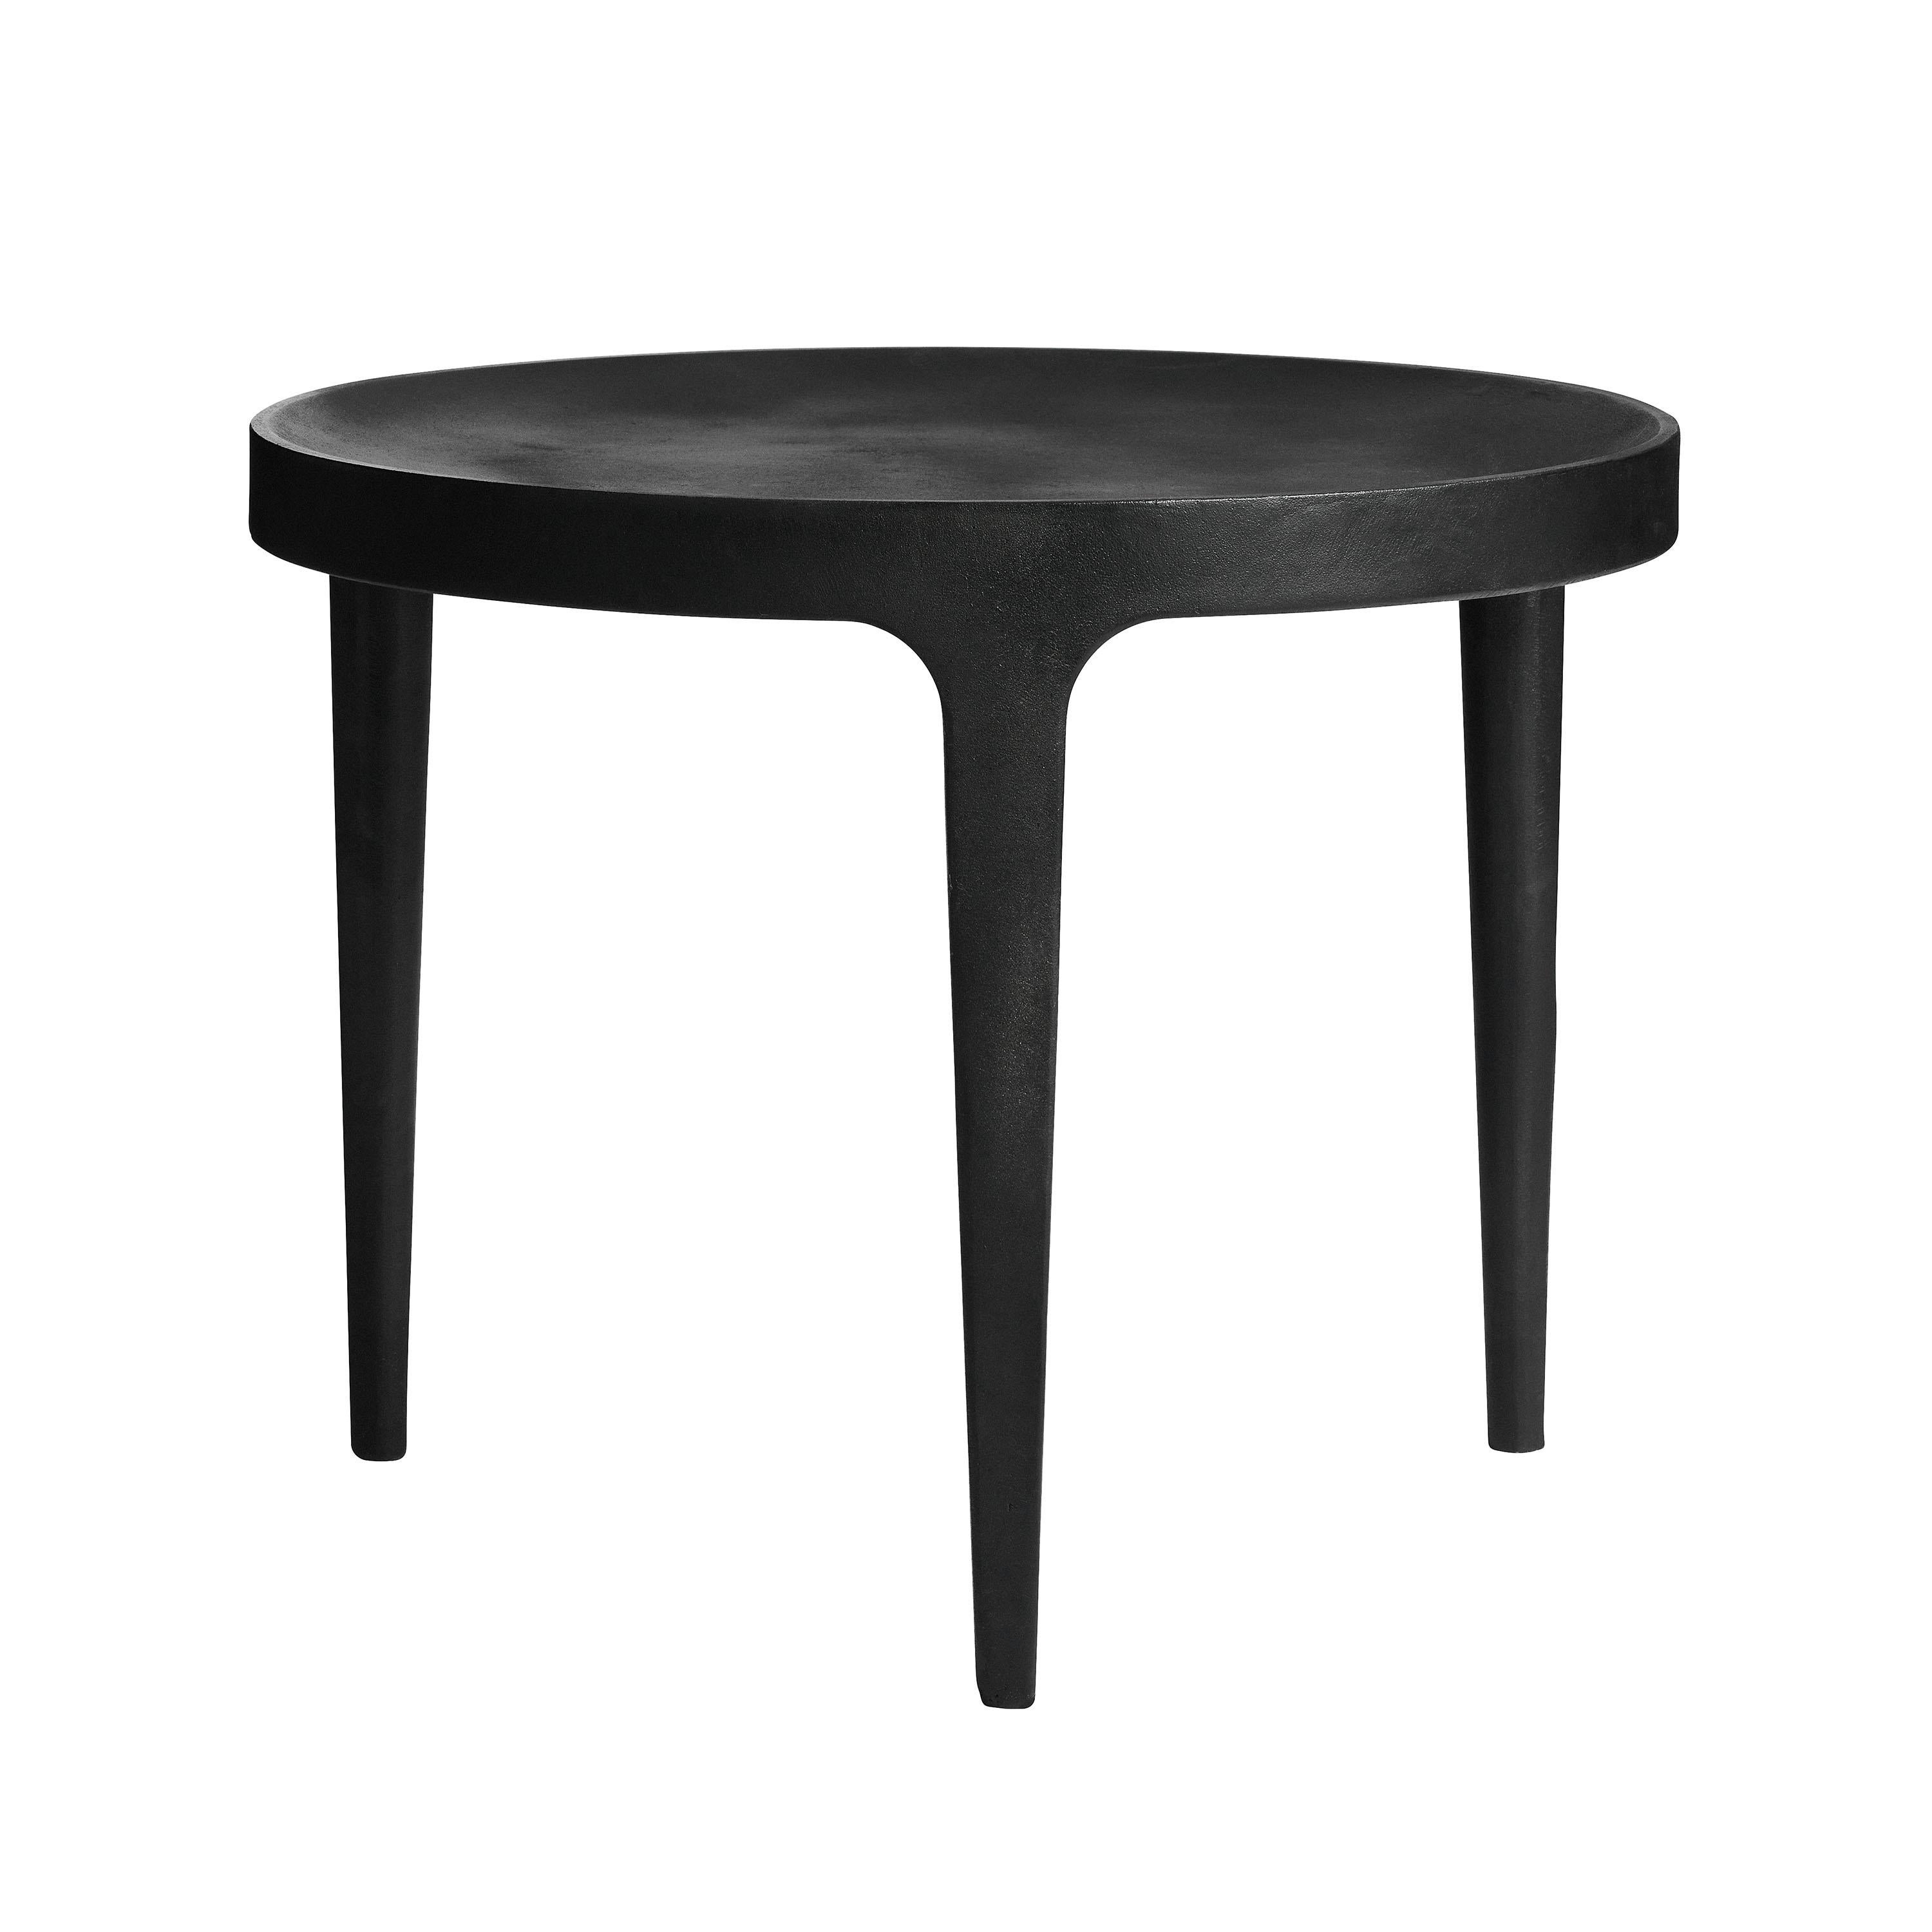 Organic Modern Contemporary Side Table 'Ghost' by Fogia, Black Aluminium For Sale